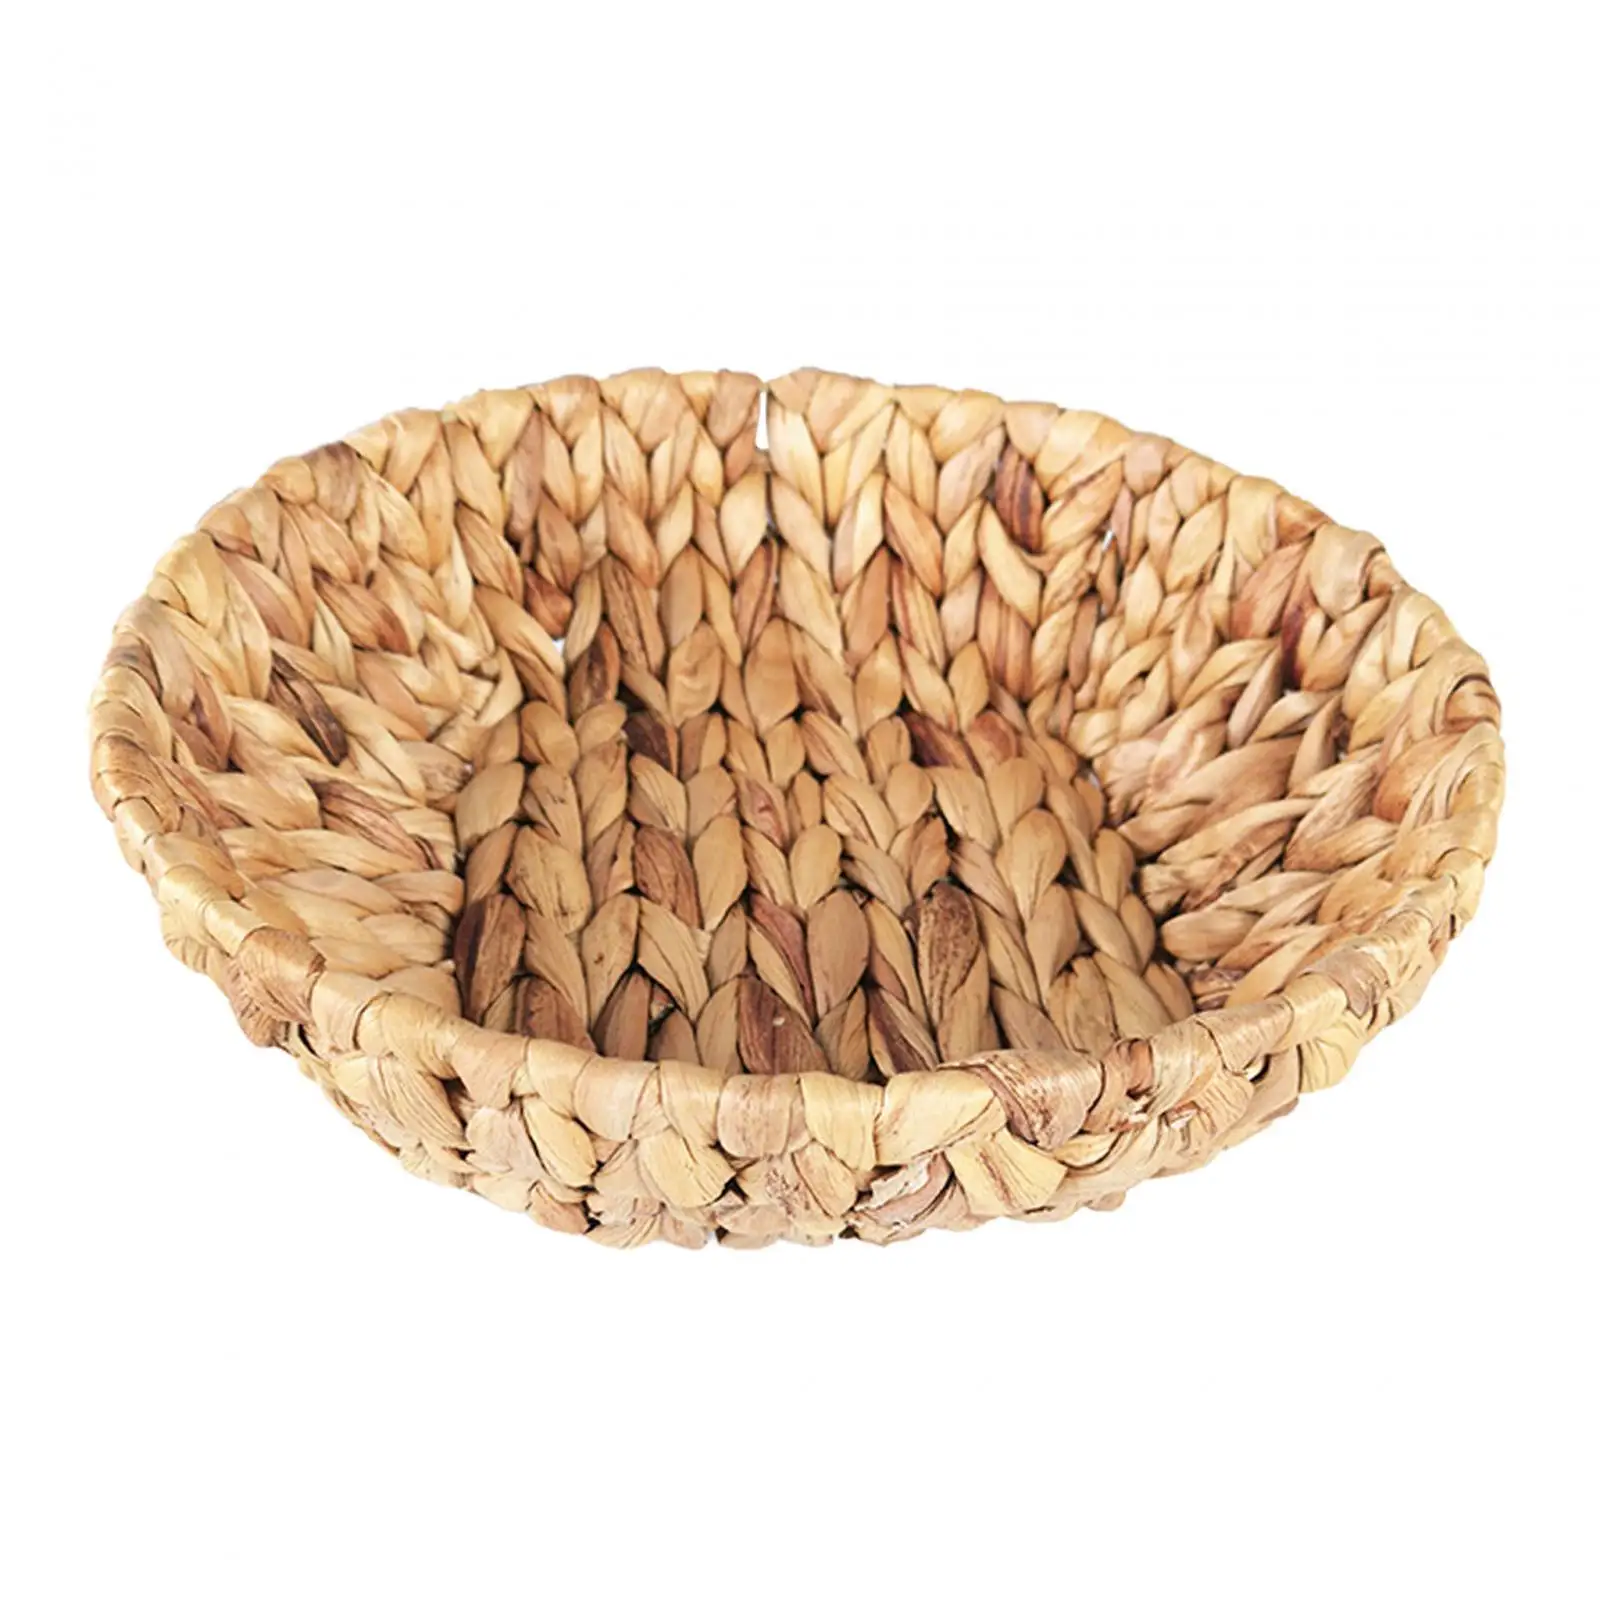 Water Hyacinth Storage Basket Home Decorative Wicker Serving Tray for Tea Party Dinner Coffee Table Fruit Arts and Crafts